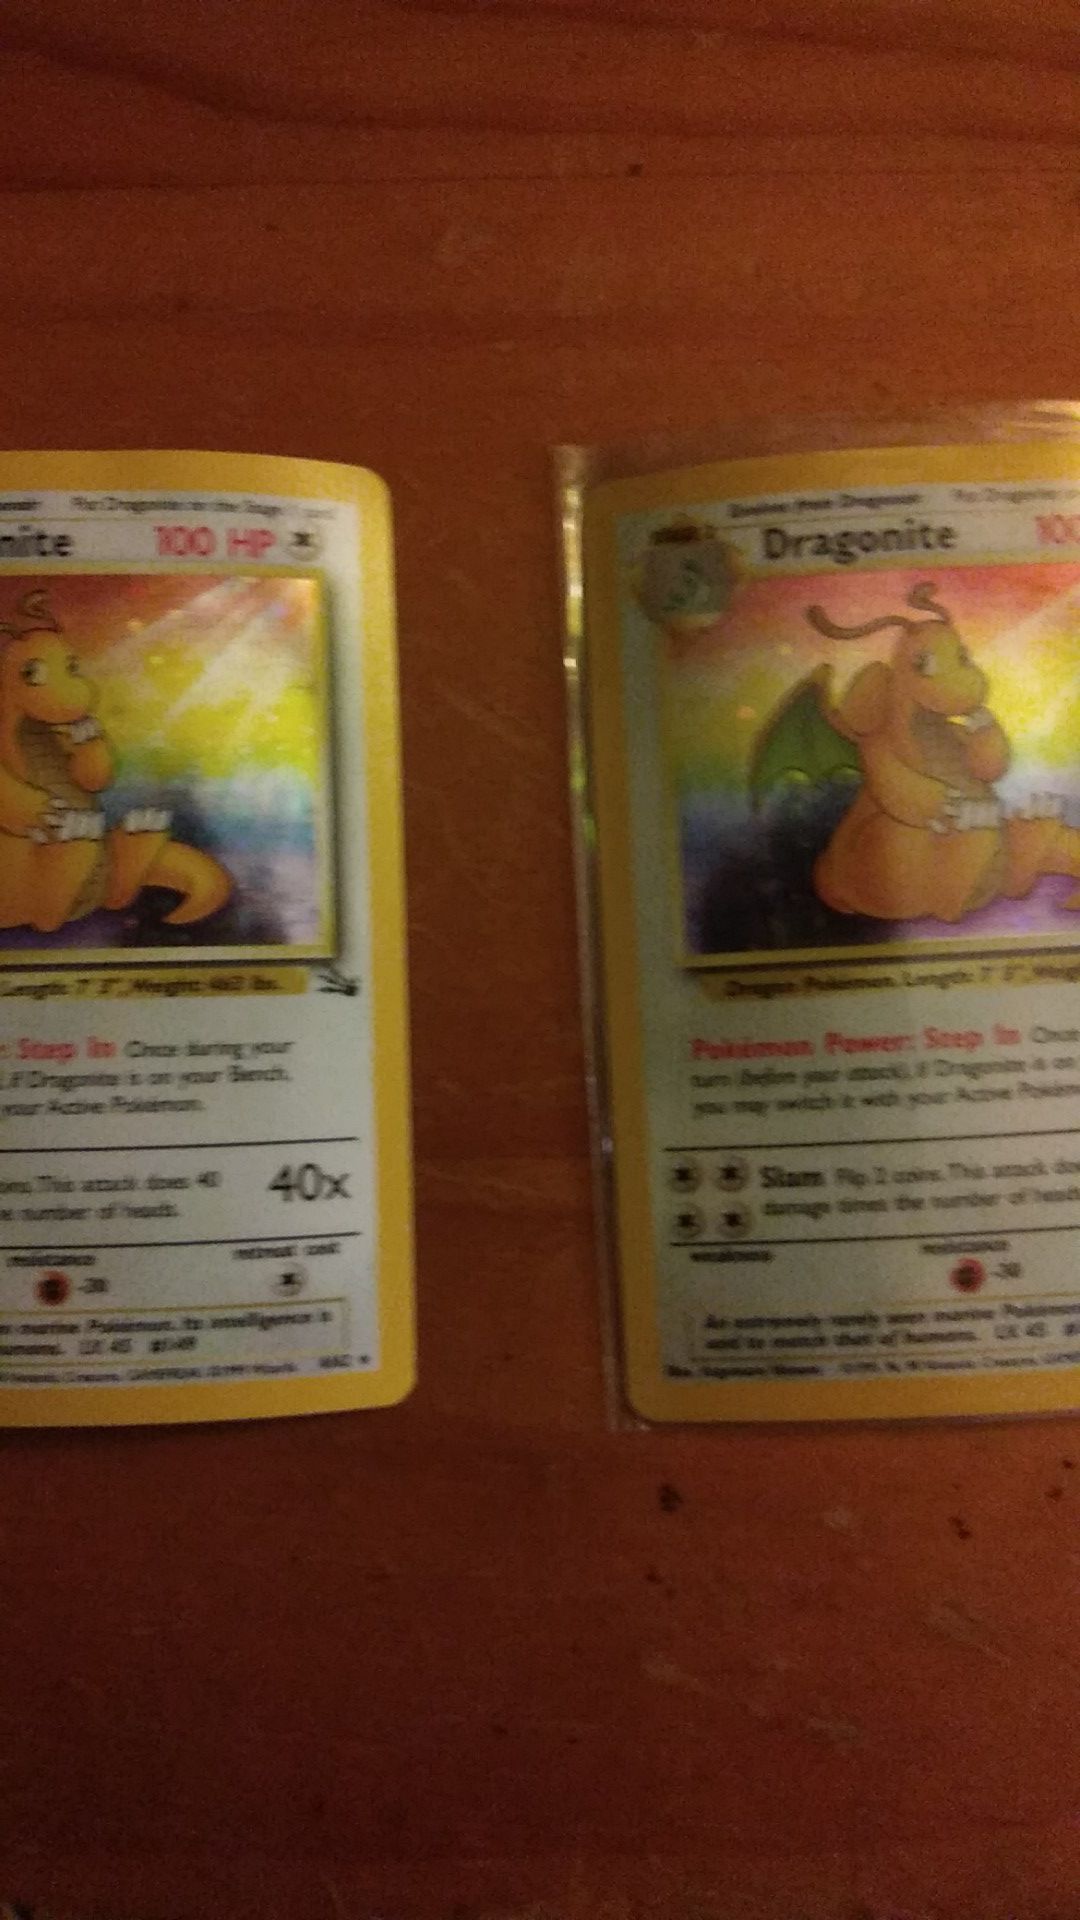 2 1995 fossil collection holo draganite pokemon cards